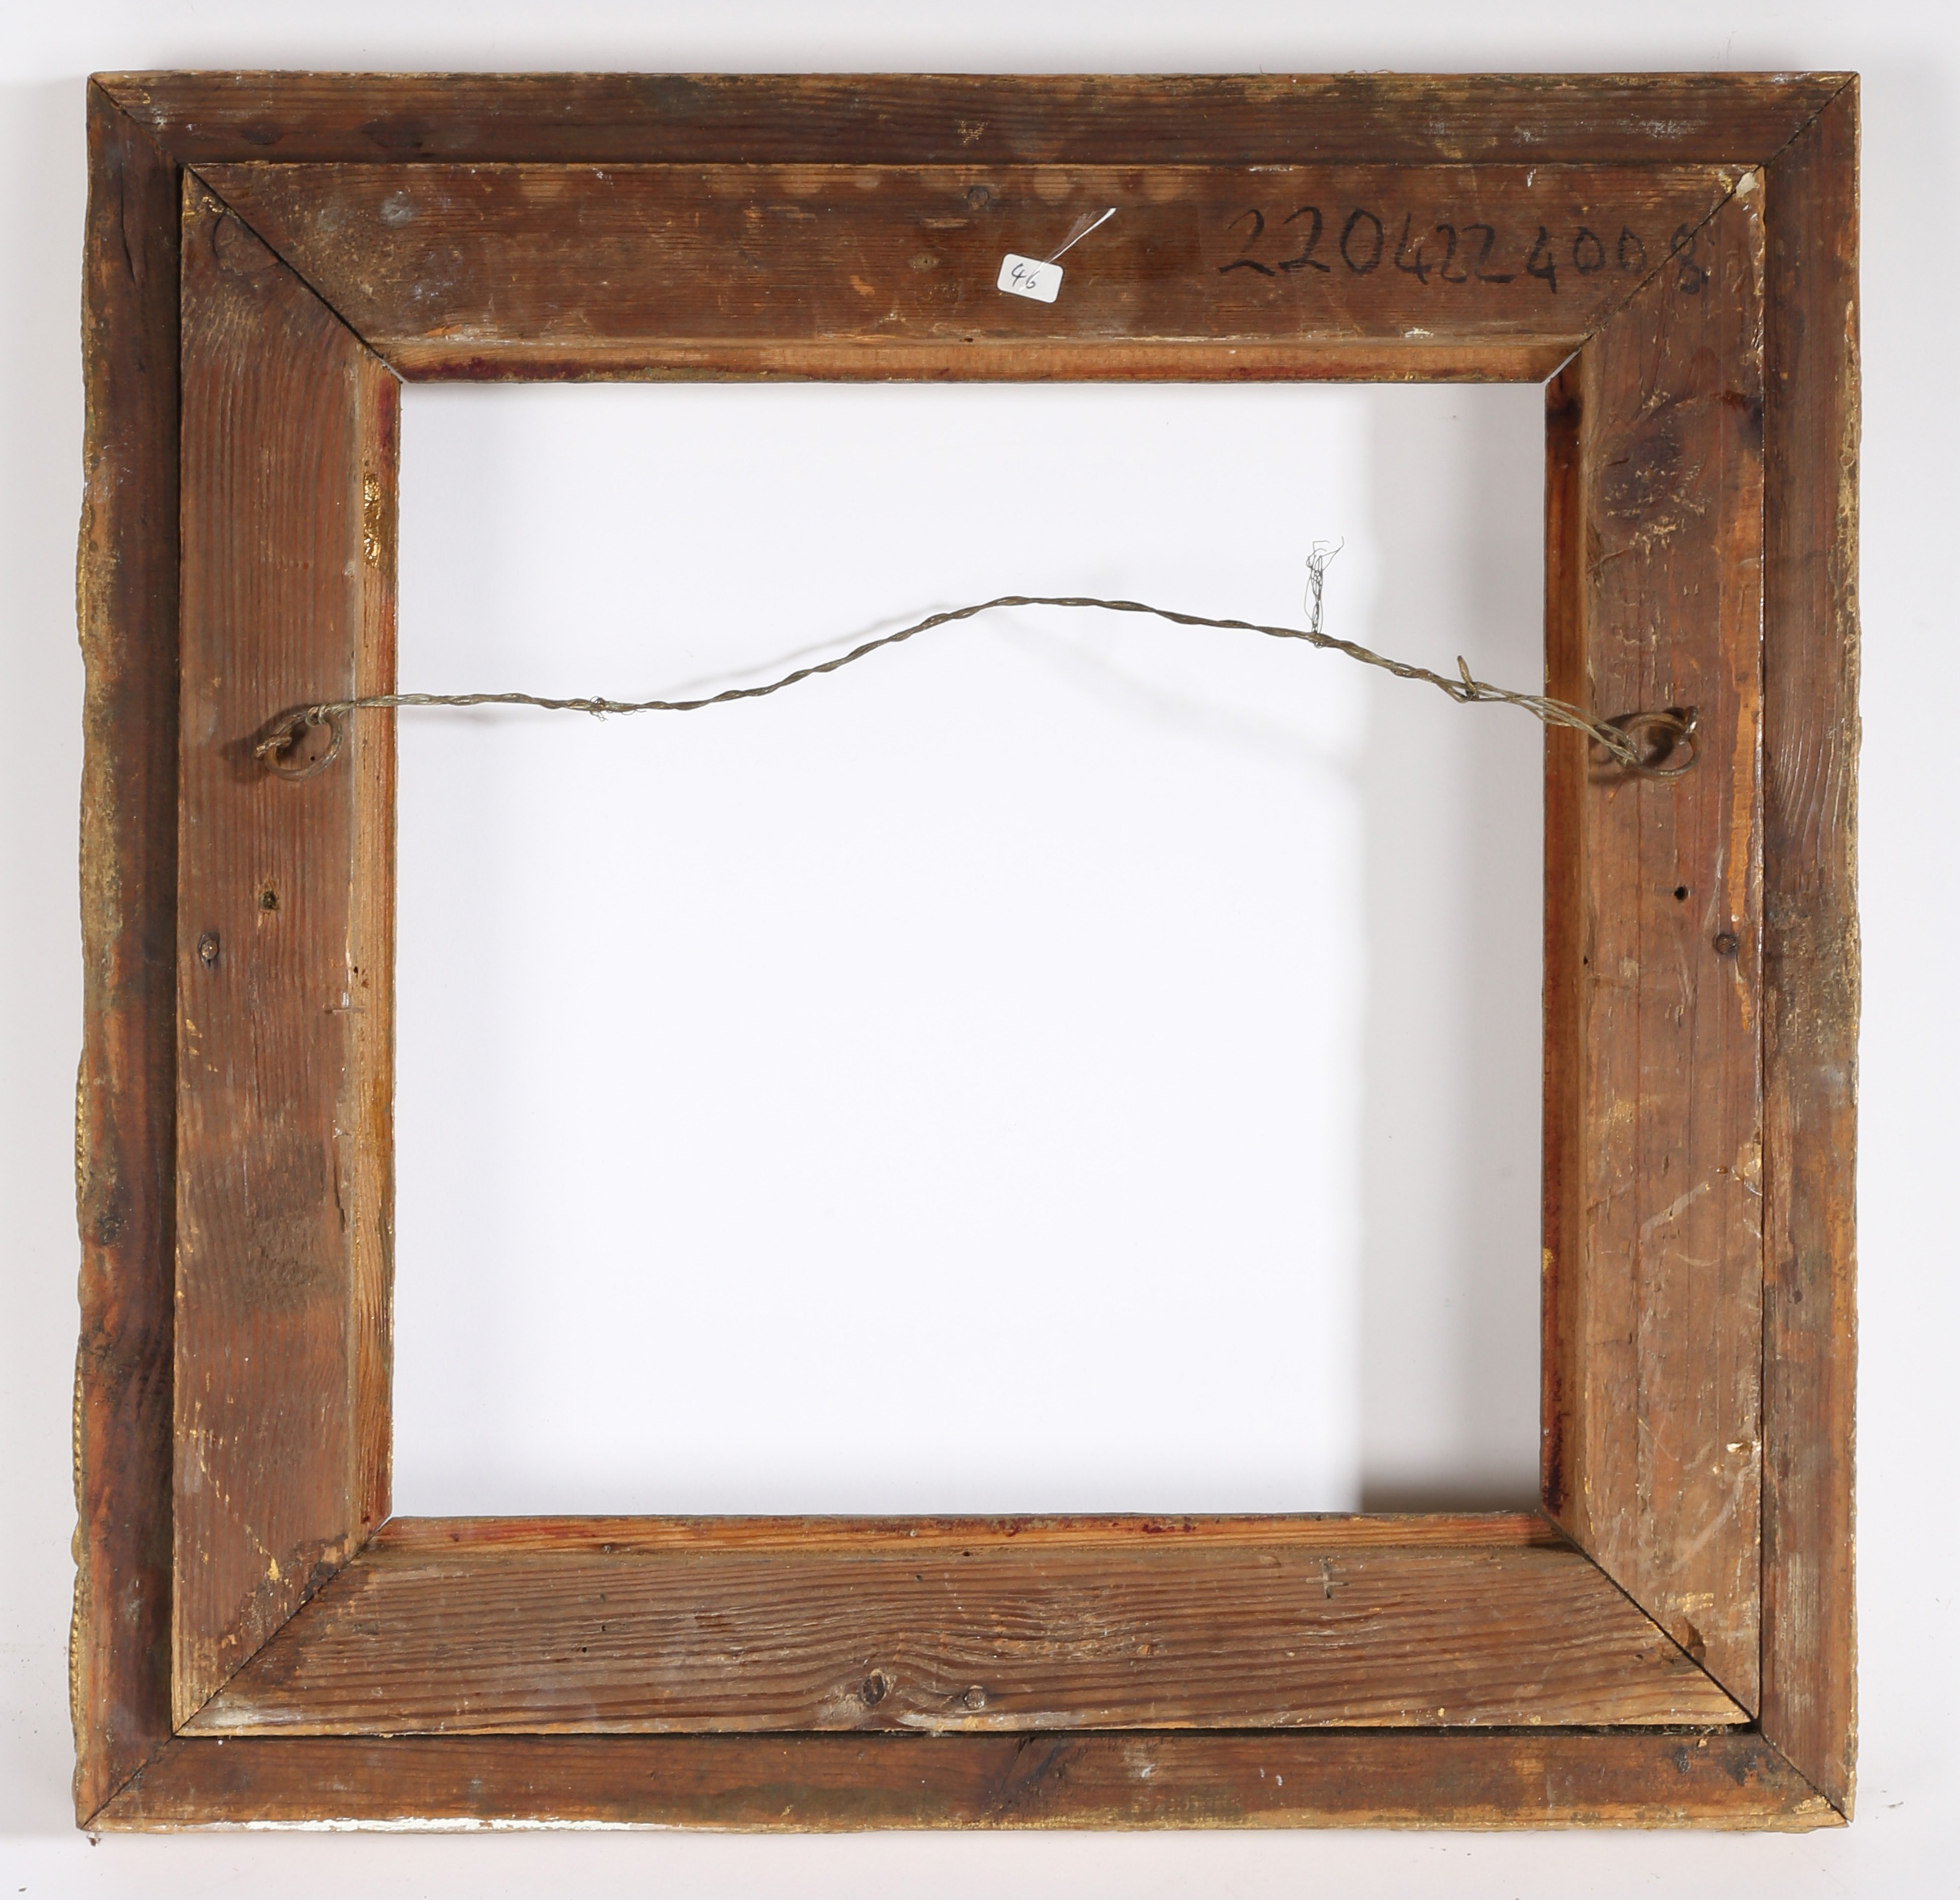 19th century rope pattern marine picture frame - rebate size 11.5in x 11.5in - Image 2 of 3